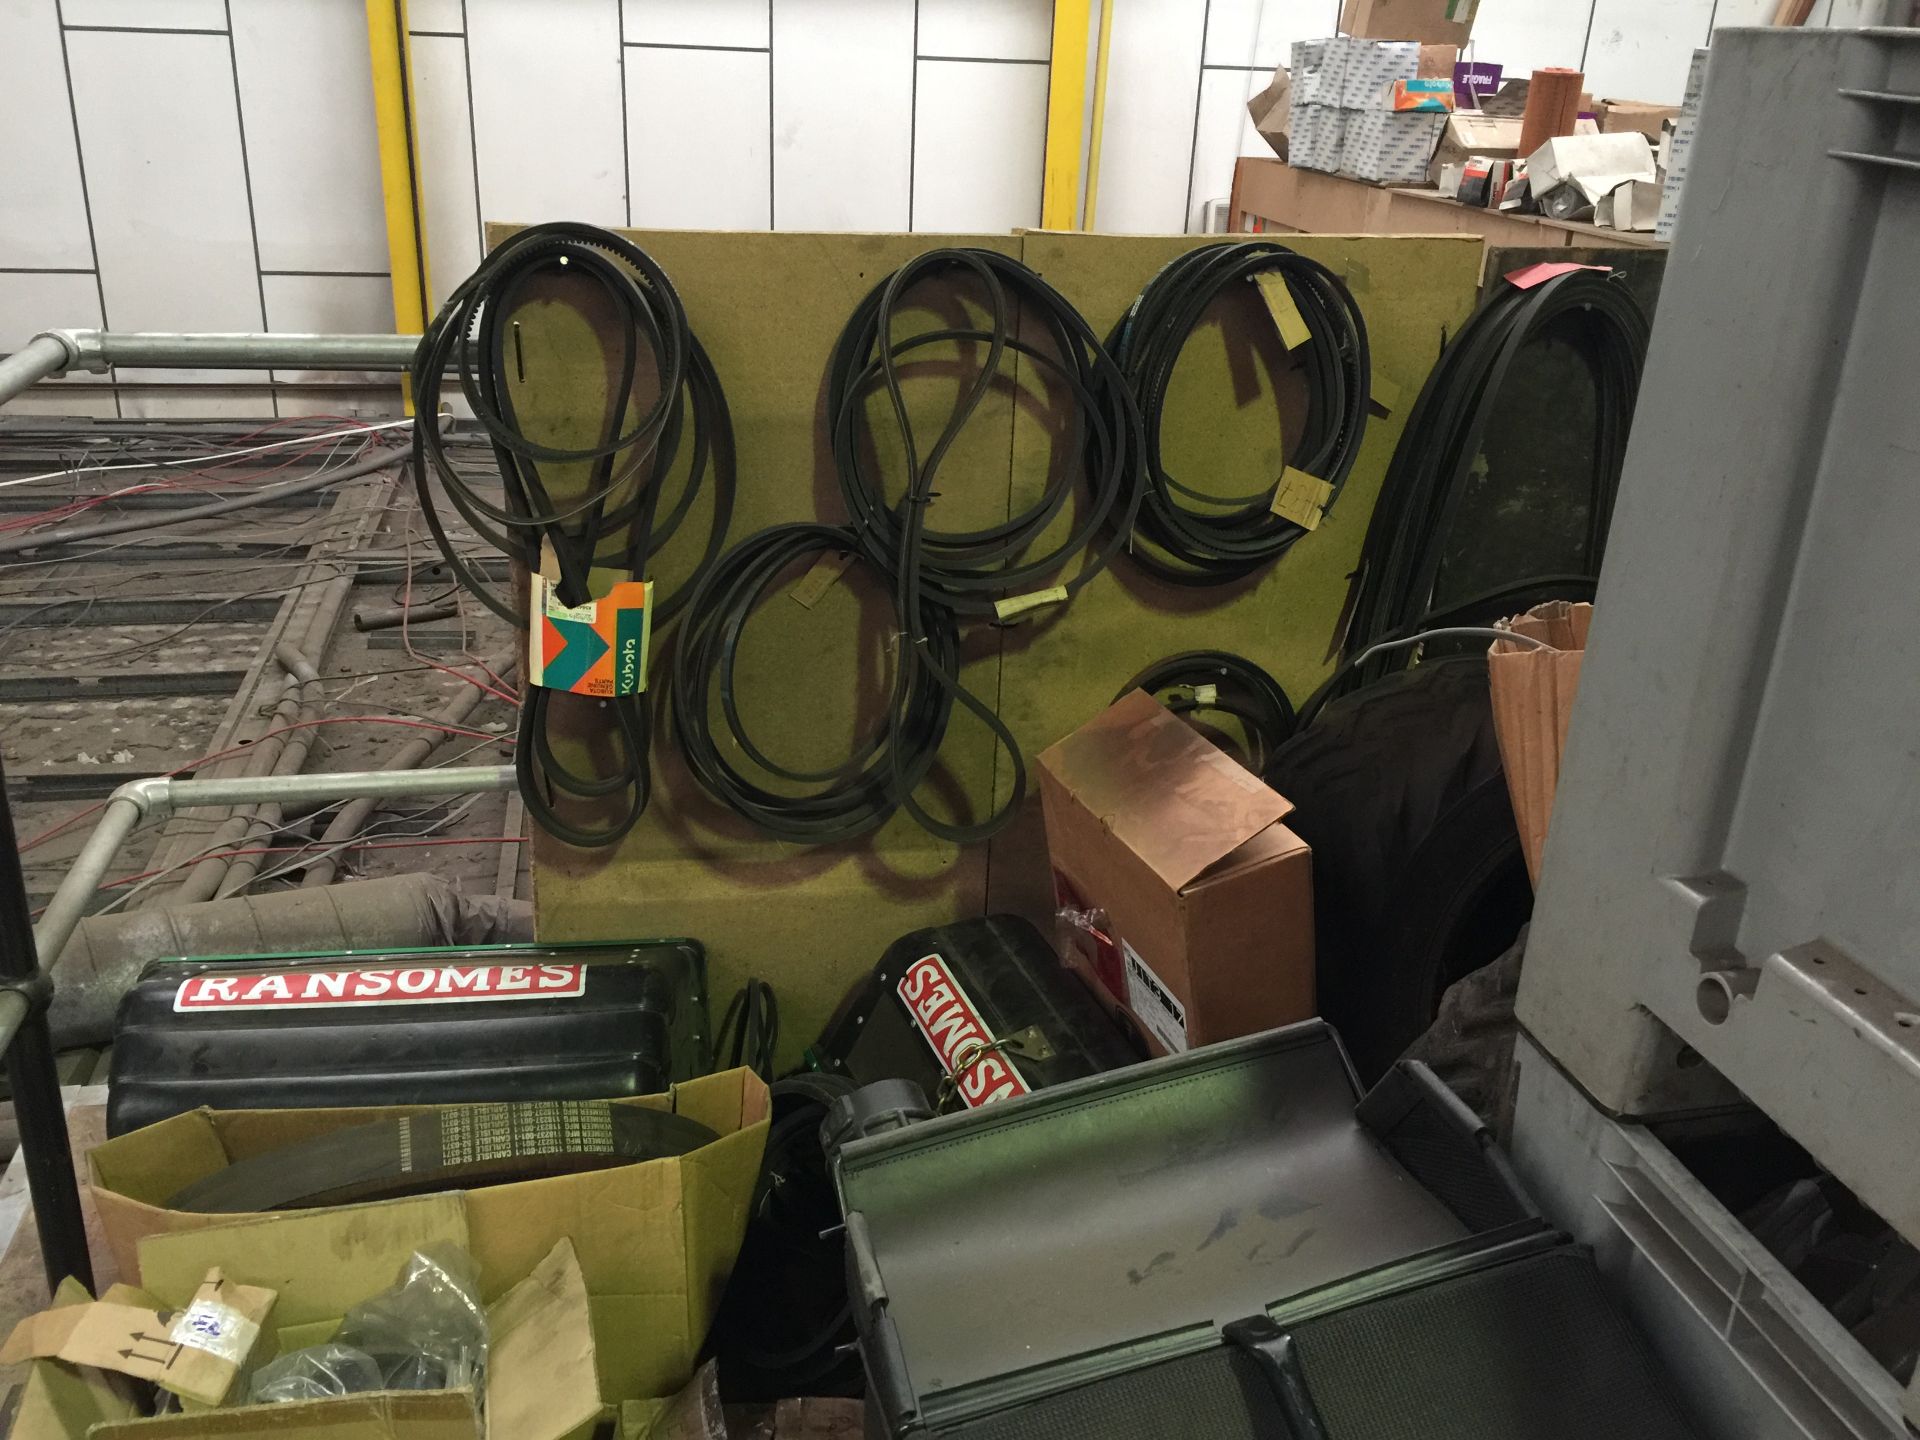 Quantity of spares including fan belts, spare tyres, filters, etc, as indicated, 3 stillages 2 mobil - Bild 5 aus 11